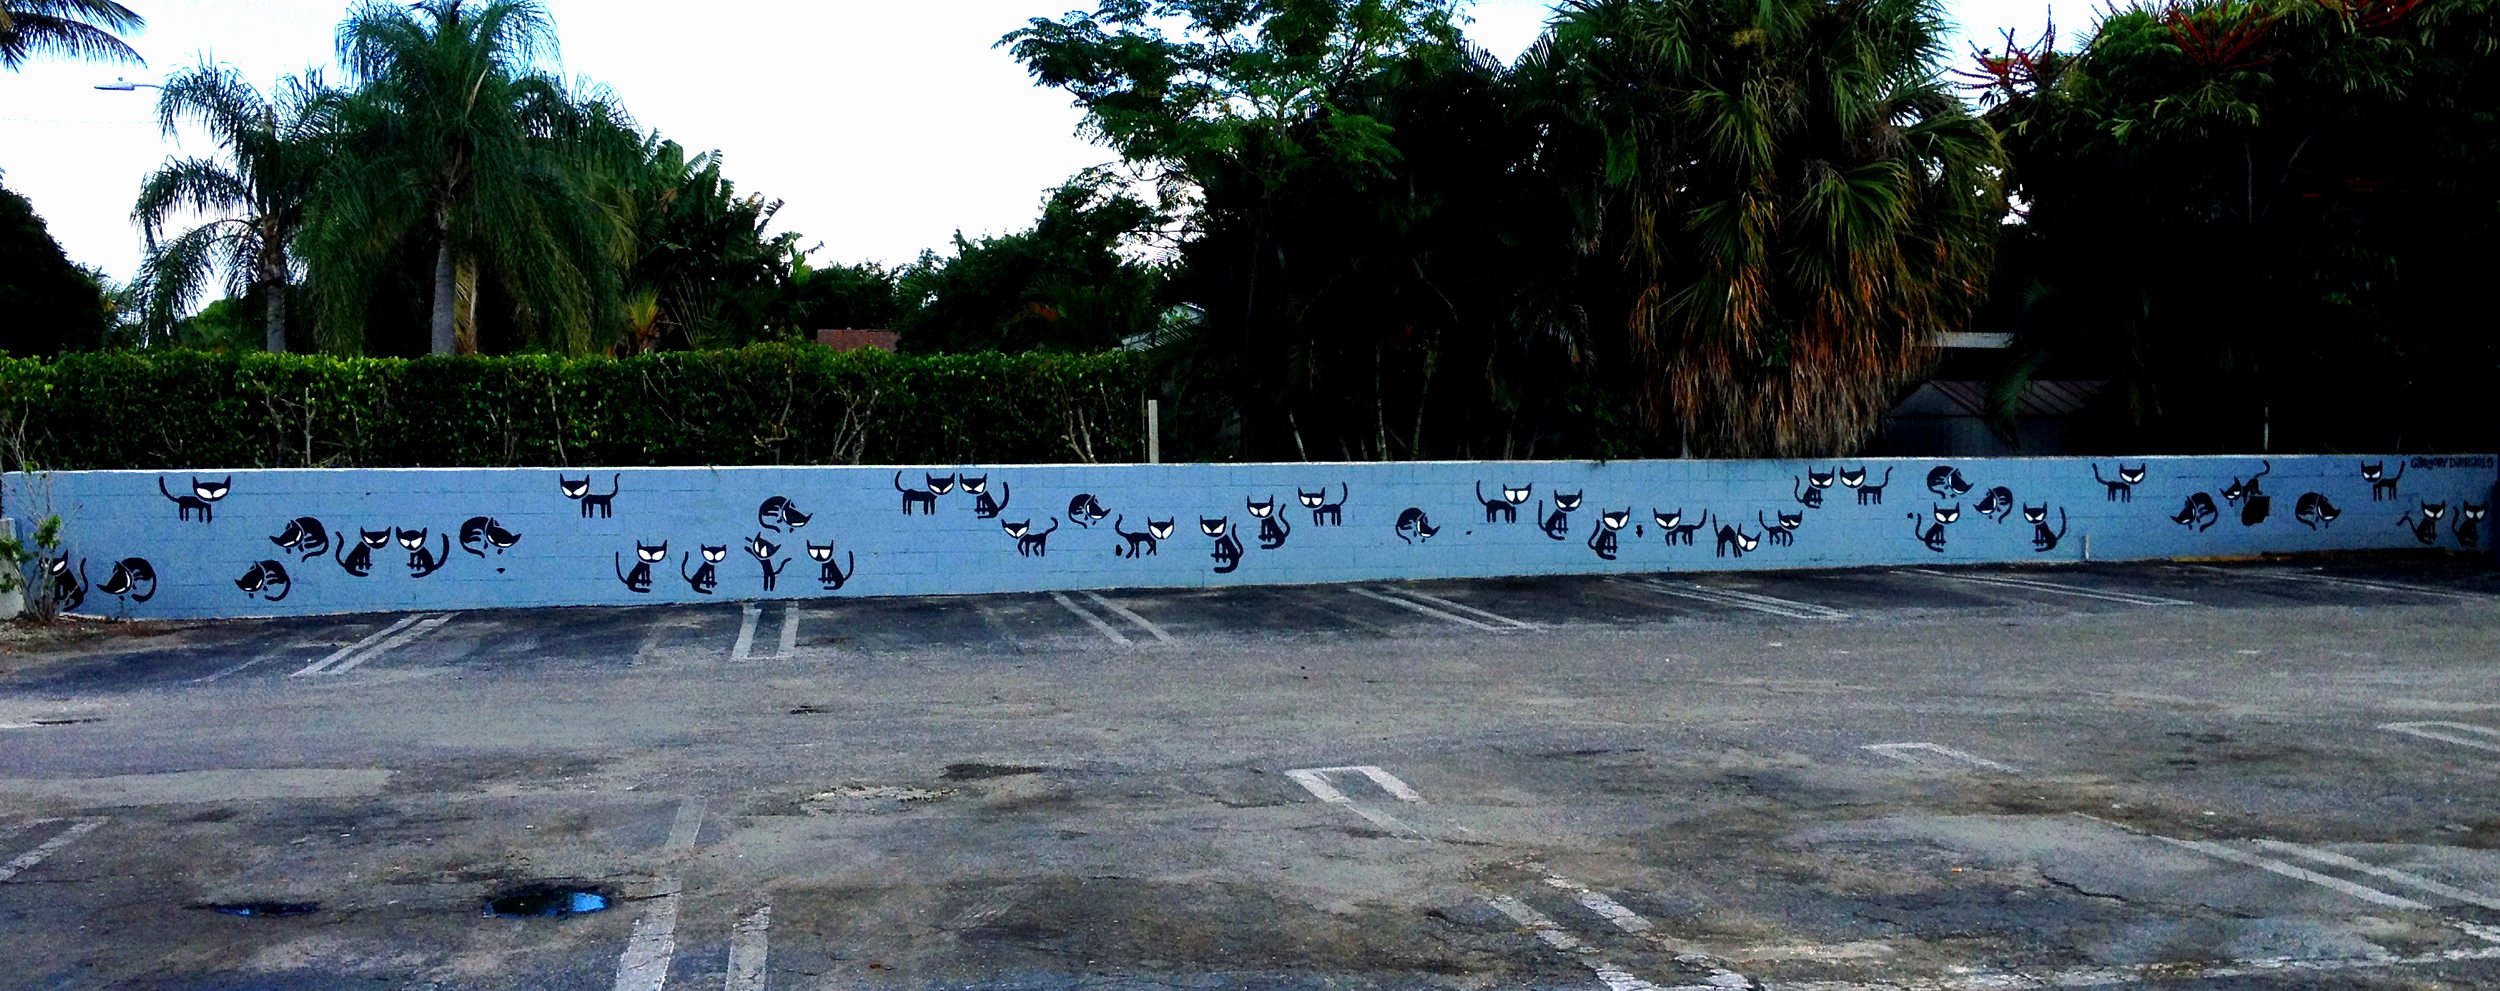   Echoes  mural commissioned by Howley’s Restaurant. part of my Cats series 200’w x 4’h 4700 S Dixie Hwy, West Palm Beach, FL, 33405. 2015 